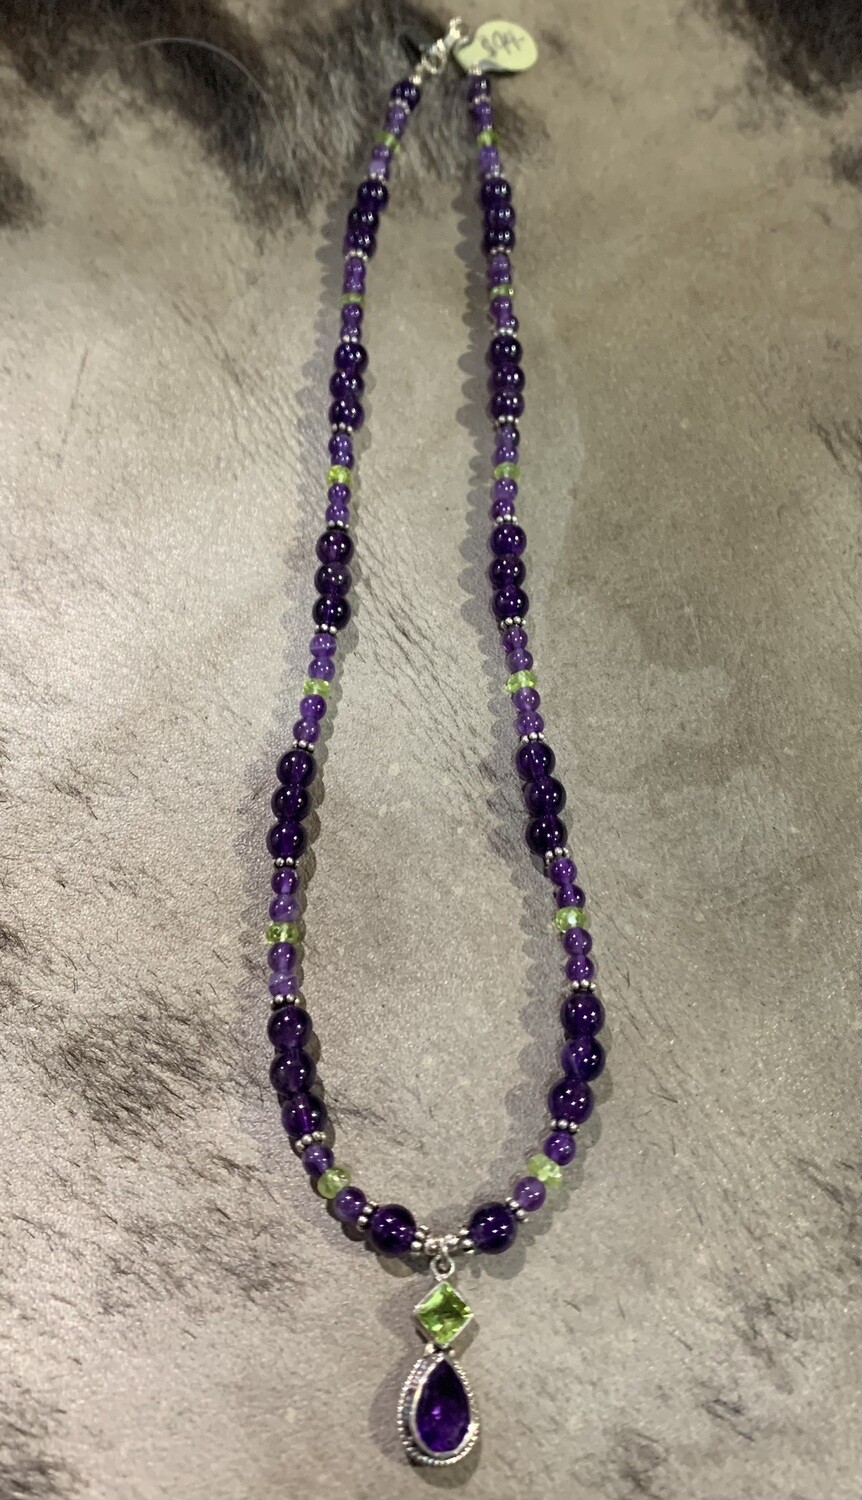 PAIGE WALLACE AMETHYST PERL NECKLACE